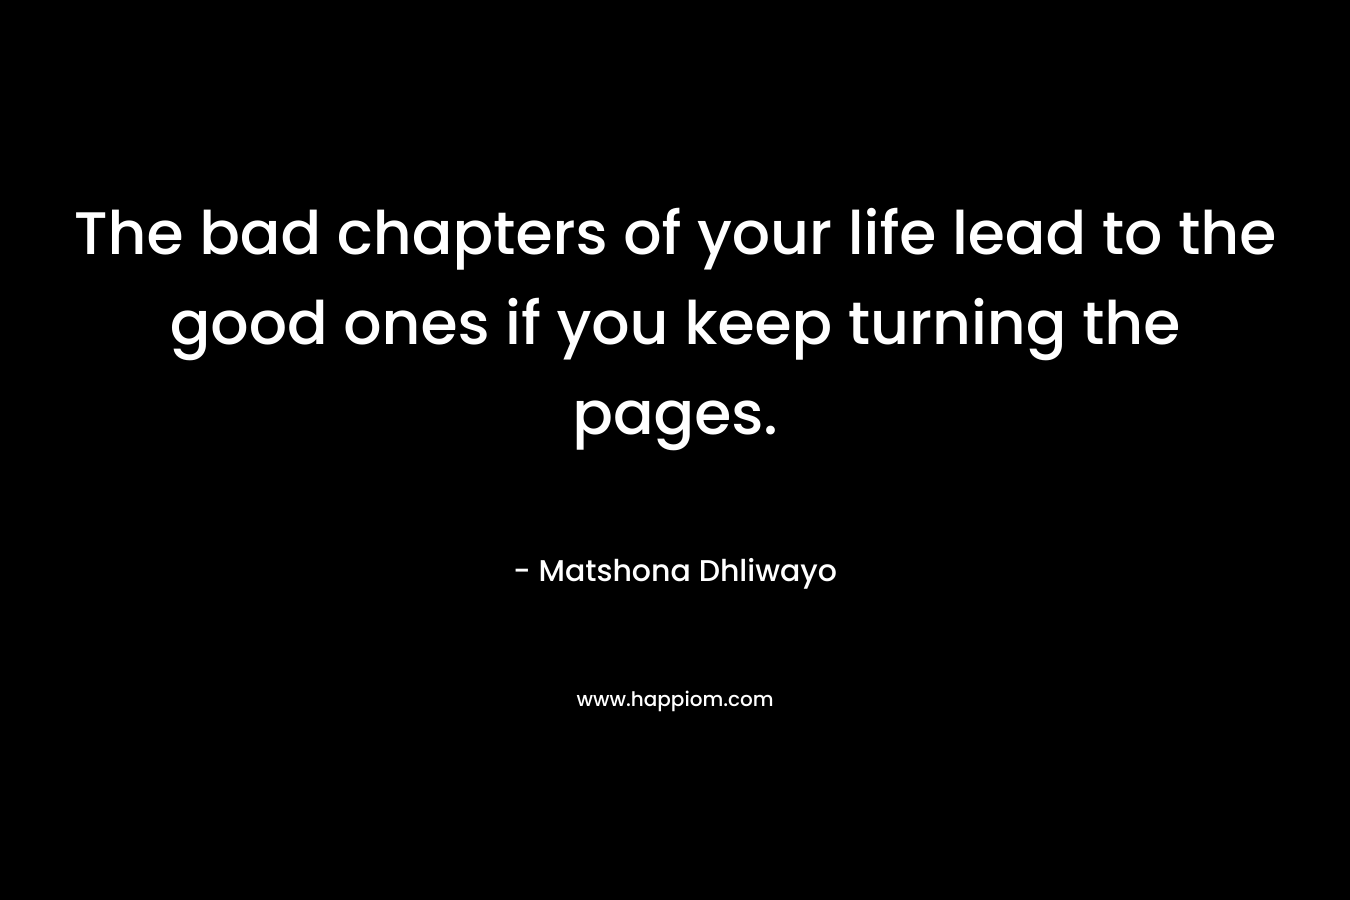 The bad chapters of your life lead to the good ones if you keep turning the pages.